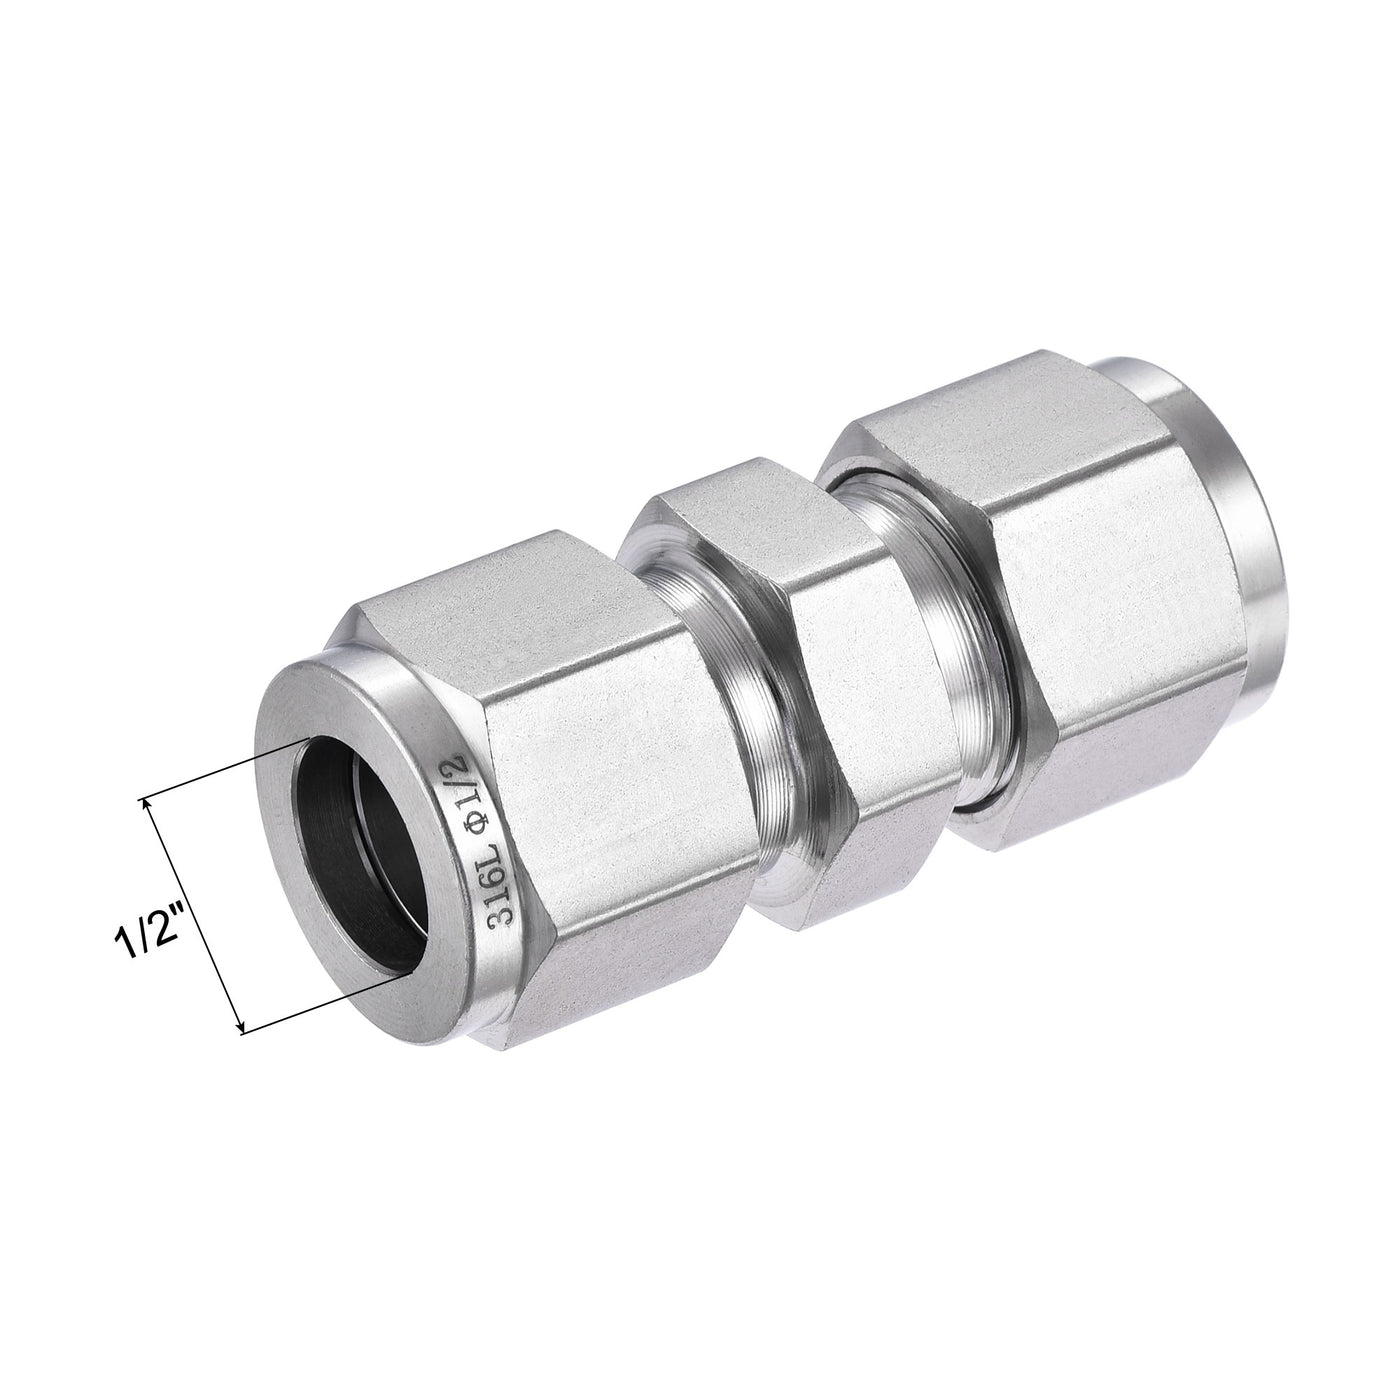 Uxcell Uxcell Compression Tube Fitting 1/8" Tube OD x 1/8" Tube OD Straight Coupling Adapter 316 Stainless Steel